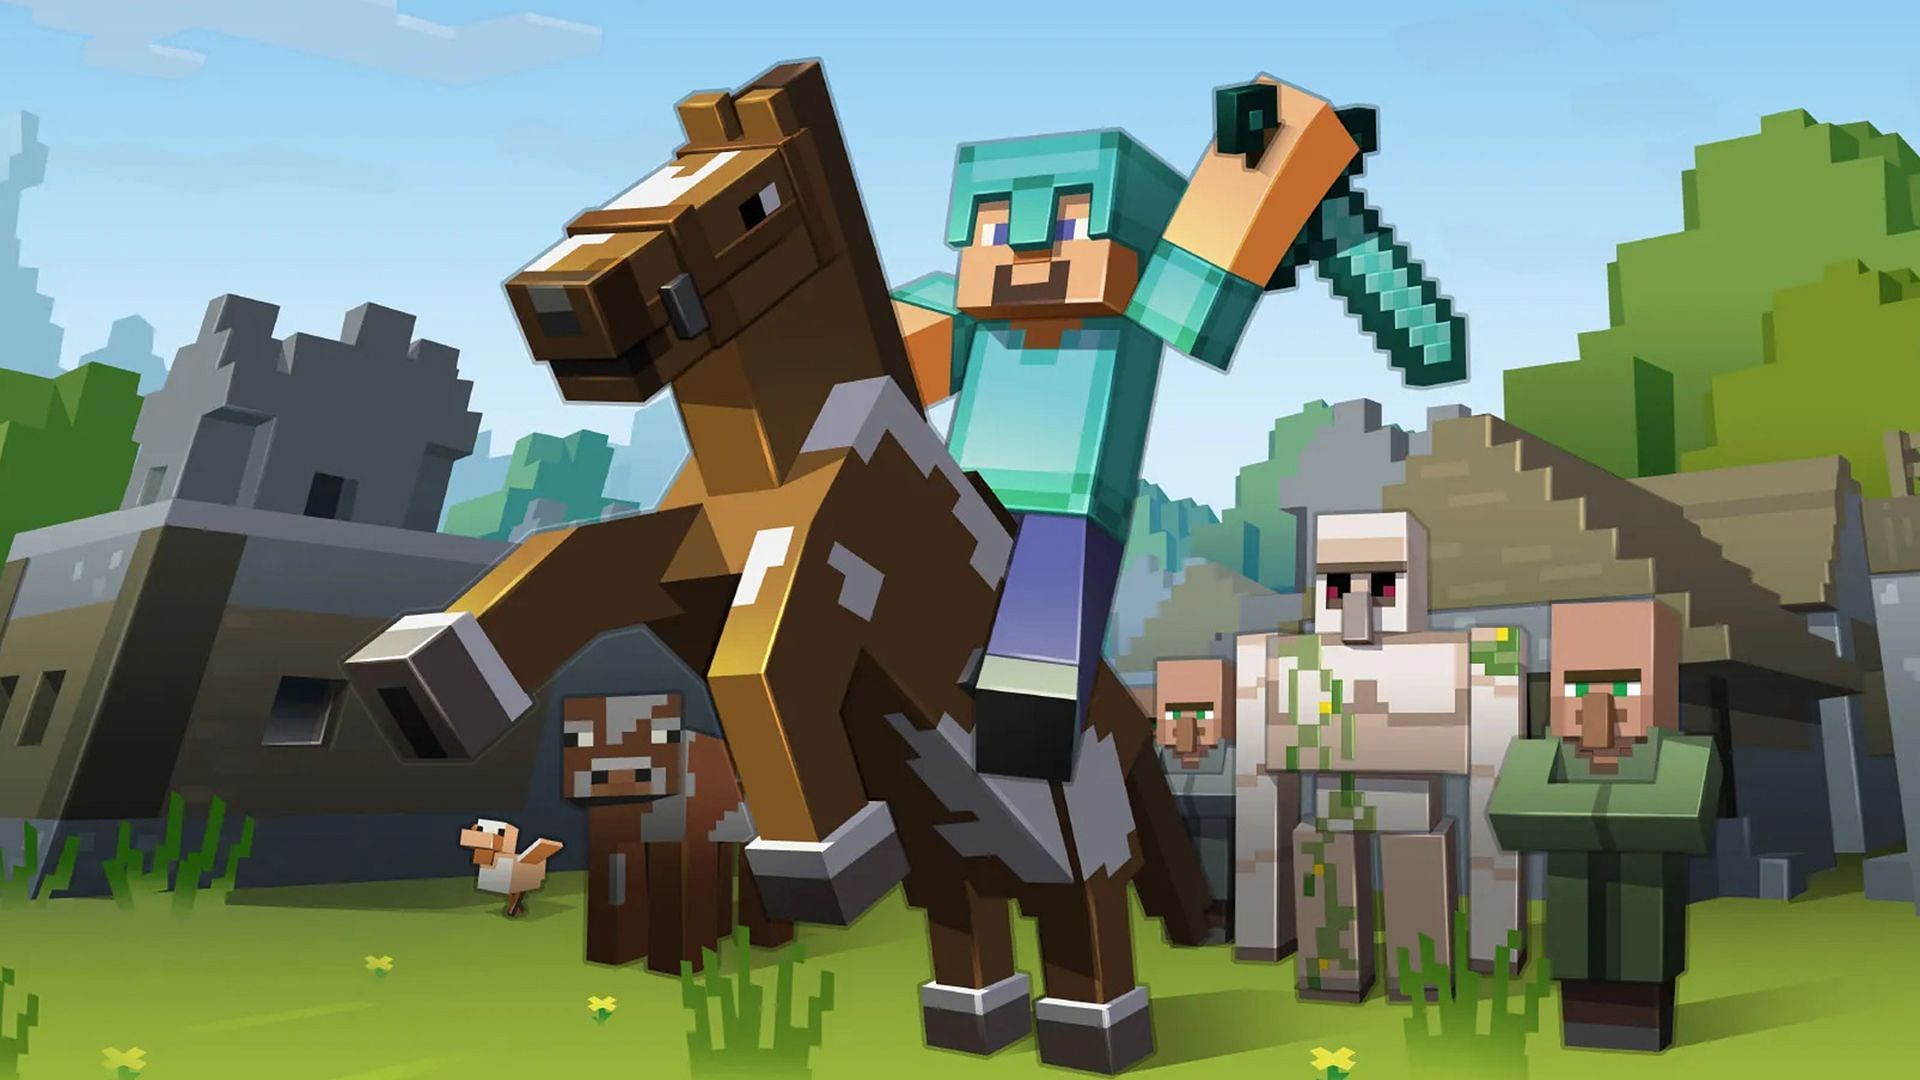 Minecraft server owner duped by NFT scam, 